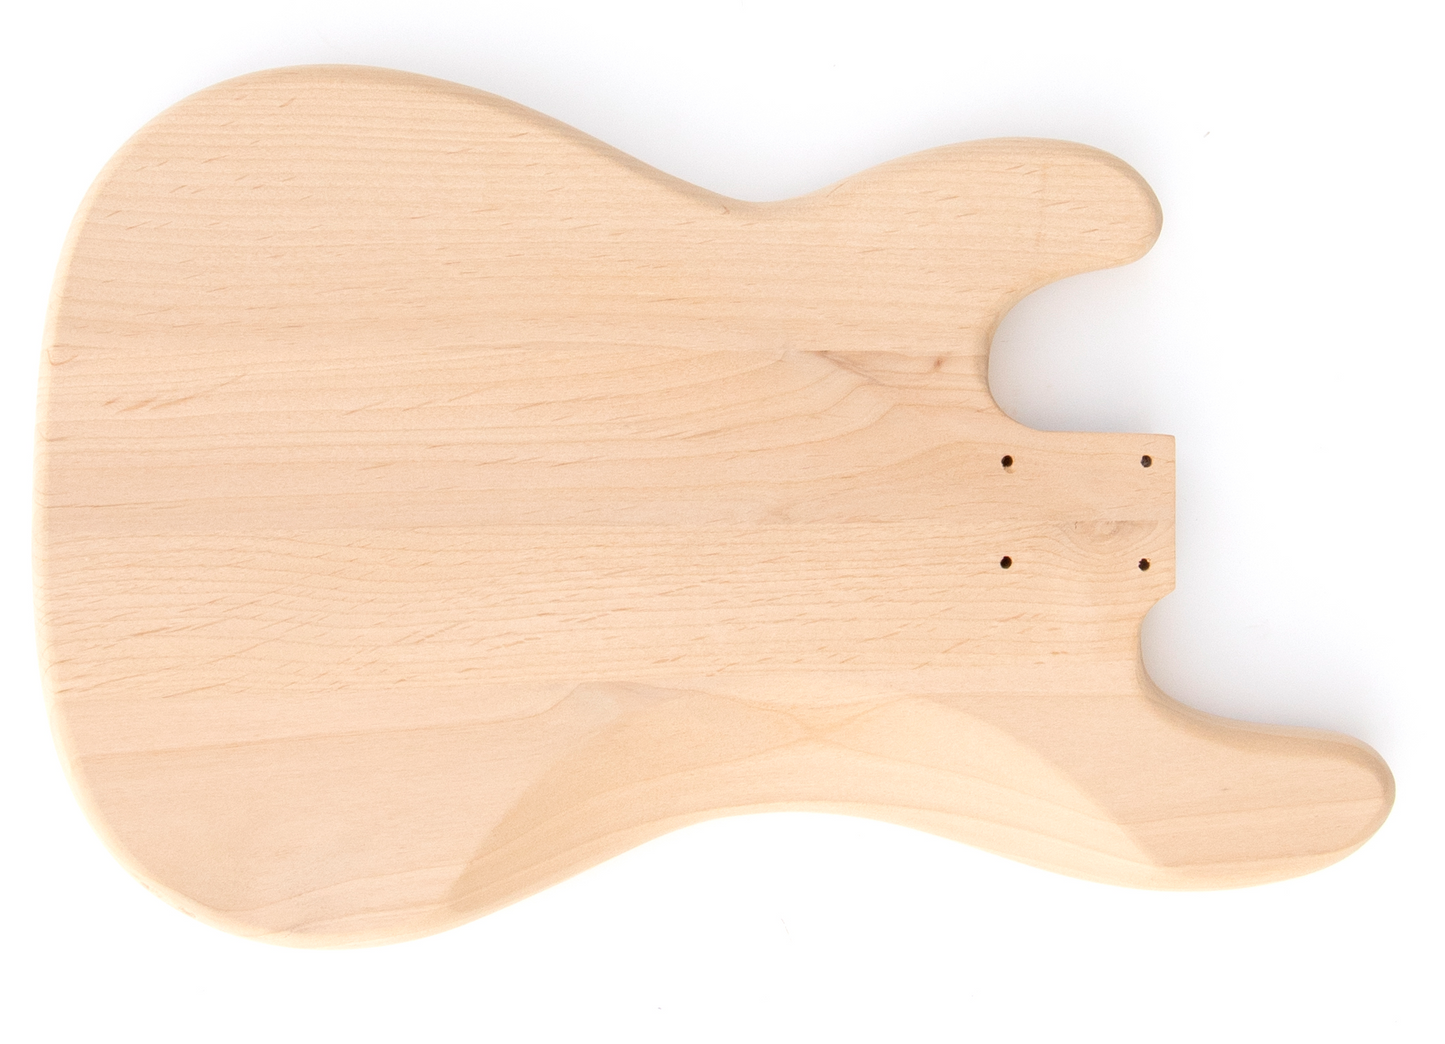 PB Style Build Your Own Bass Guitar Kit